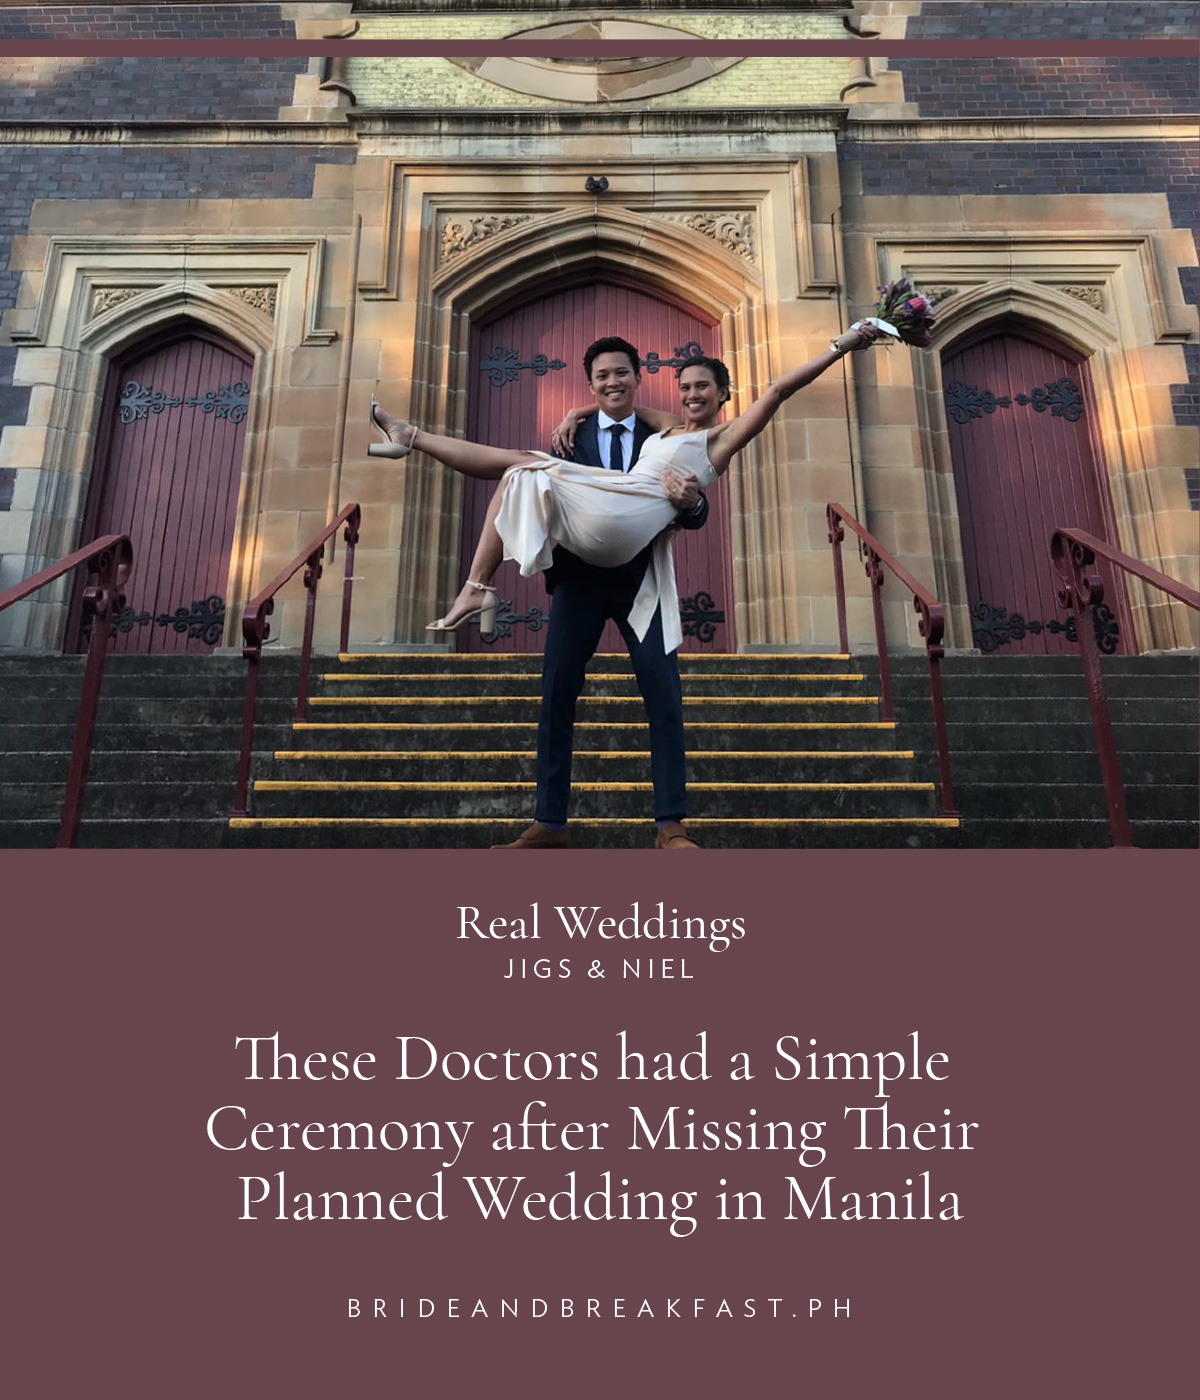 These Doctors Had a Simple Ceremony after Missing Their Planned Wedding in Manila